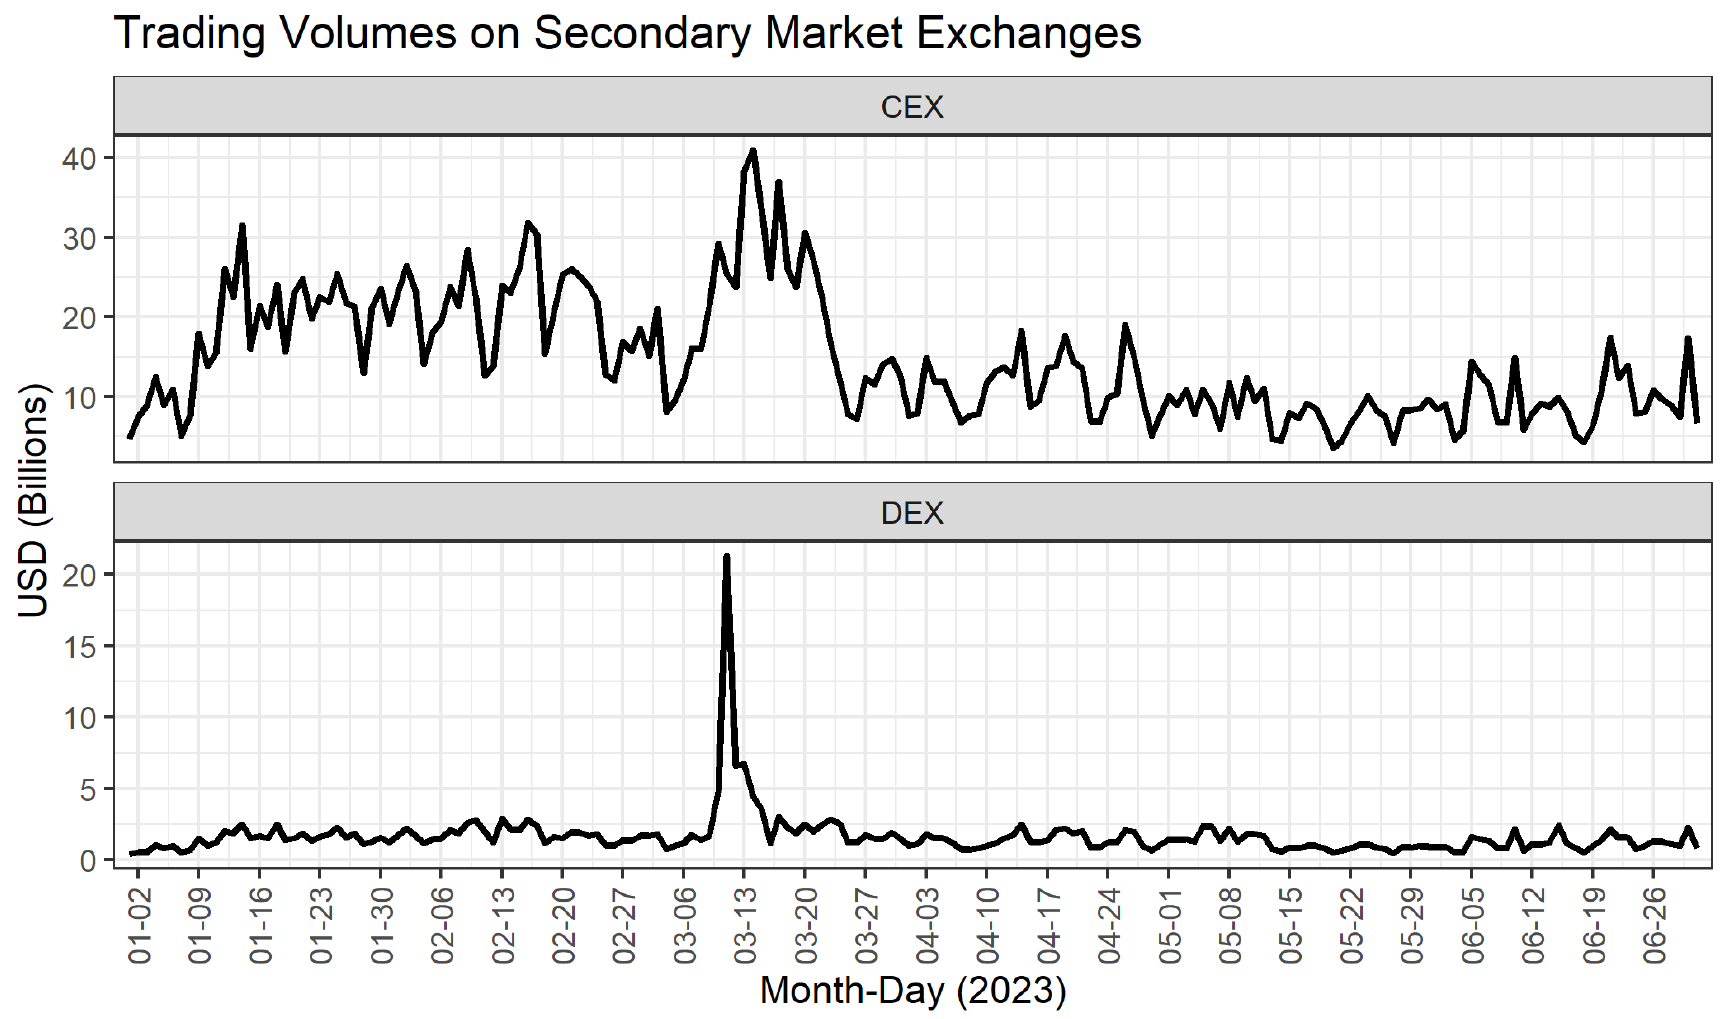 Figure 2. Daily trading volumes on secondary markets over the first half of 2023. See accessible link for data.